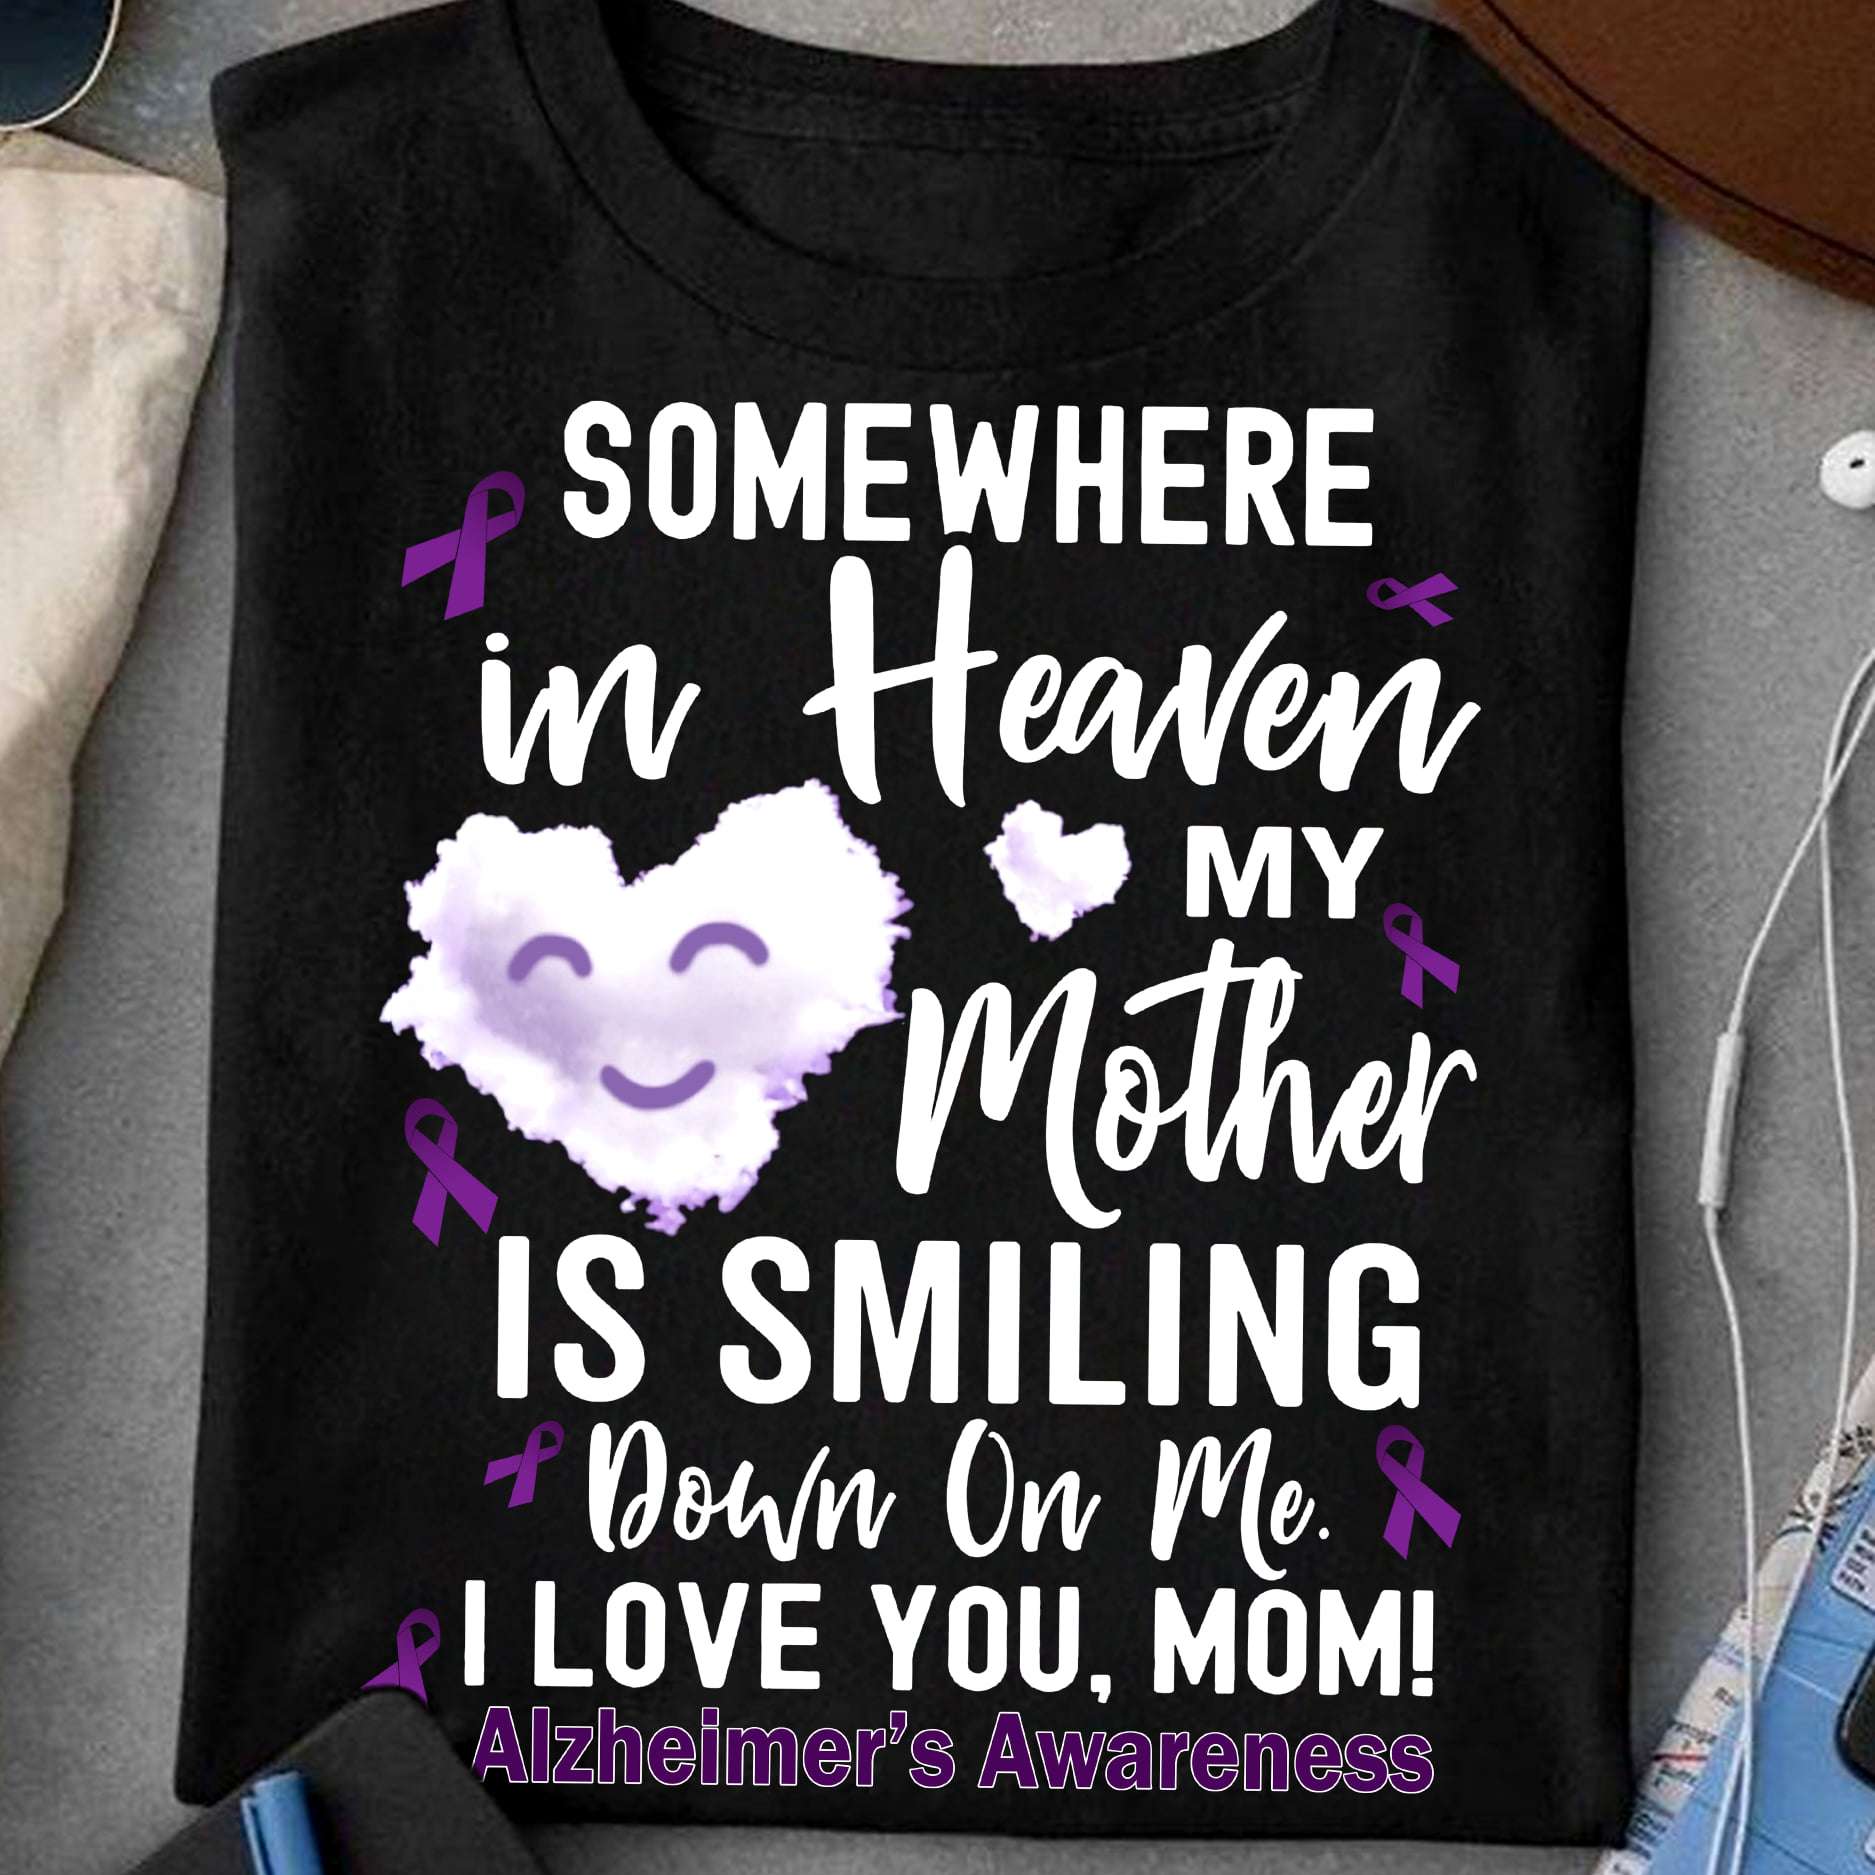 Alzheimer's Cloud Ribbon, Angel Mother - Somewhere in heaven my mother is smiling down on me i love you mom